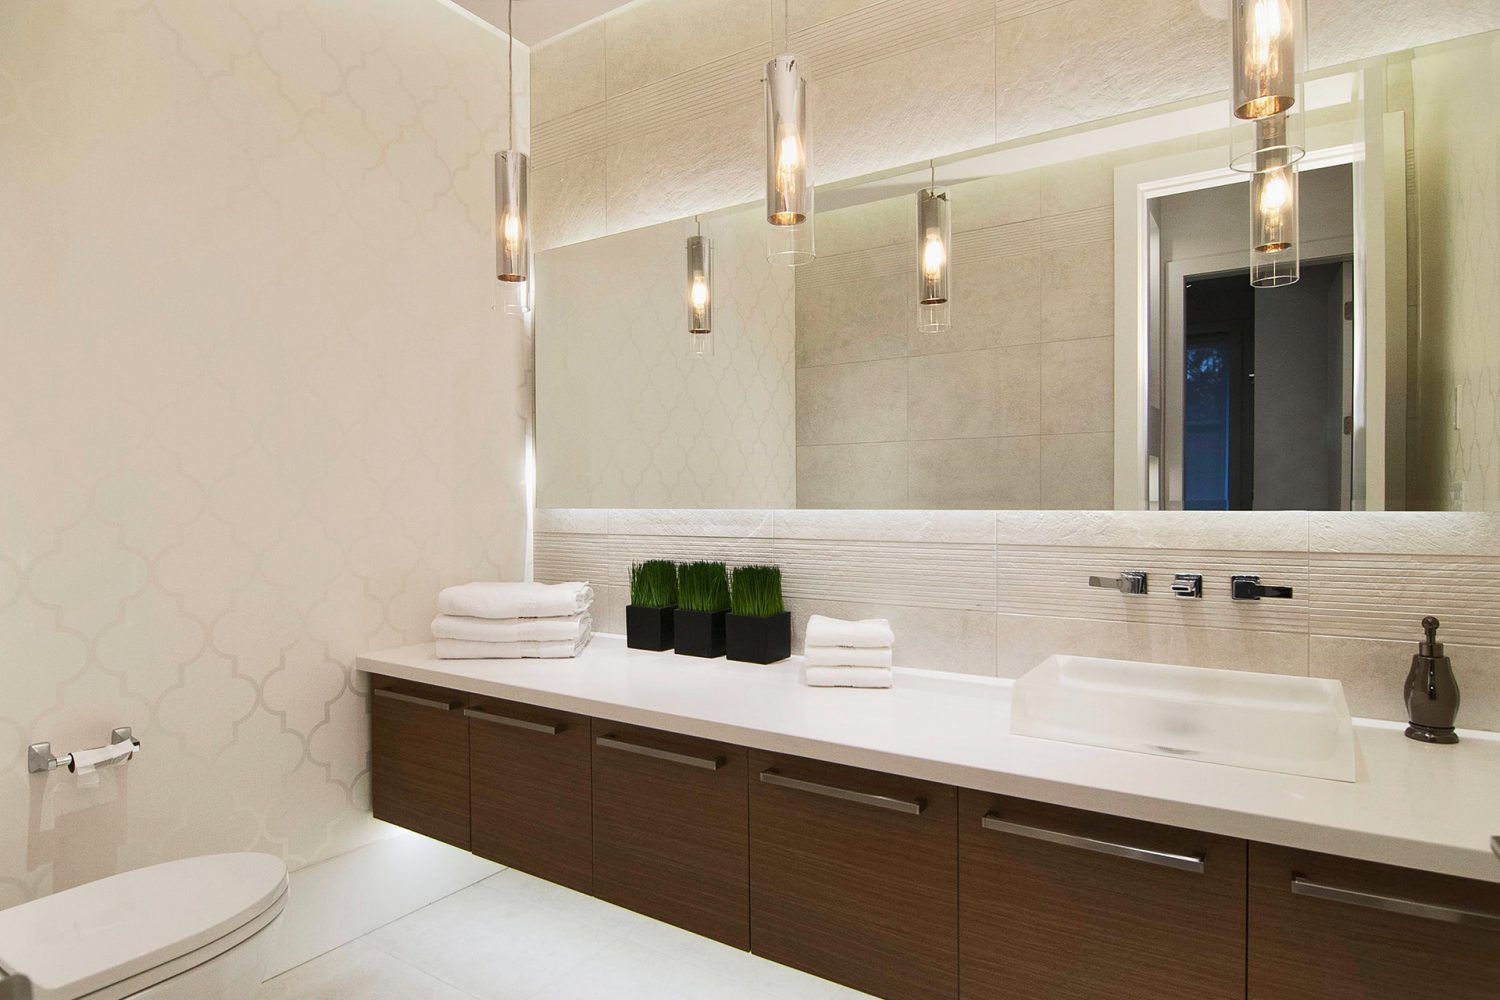 Forest interior designed bathroom with custom vanity designed by Midland Premium Properties in Vancouver, BC